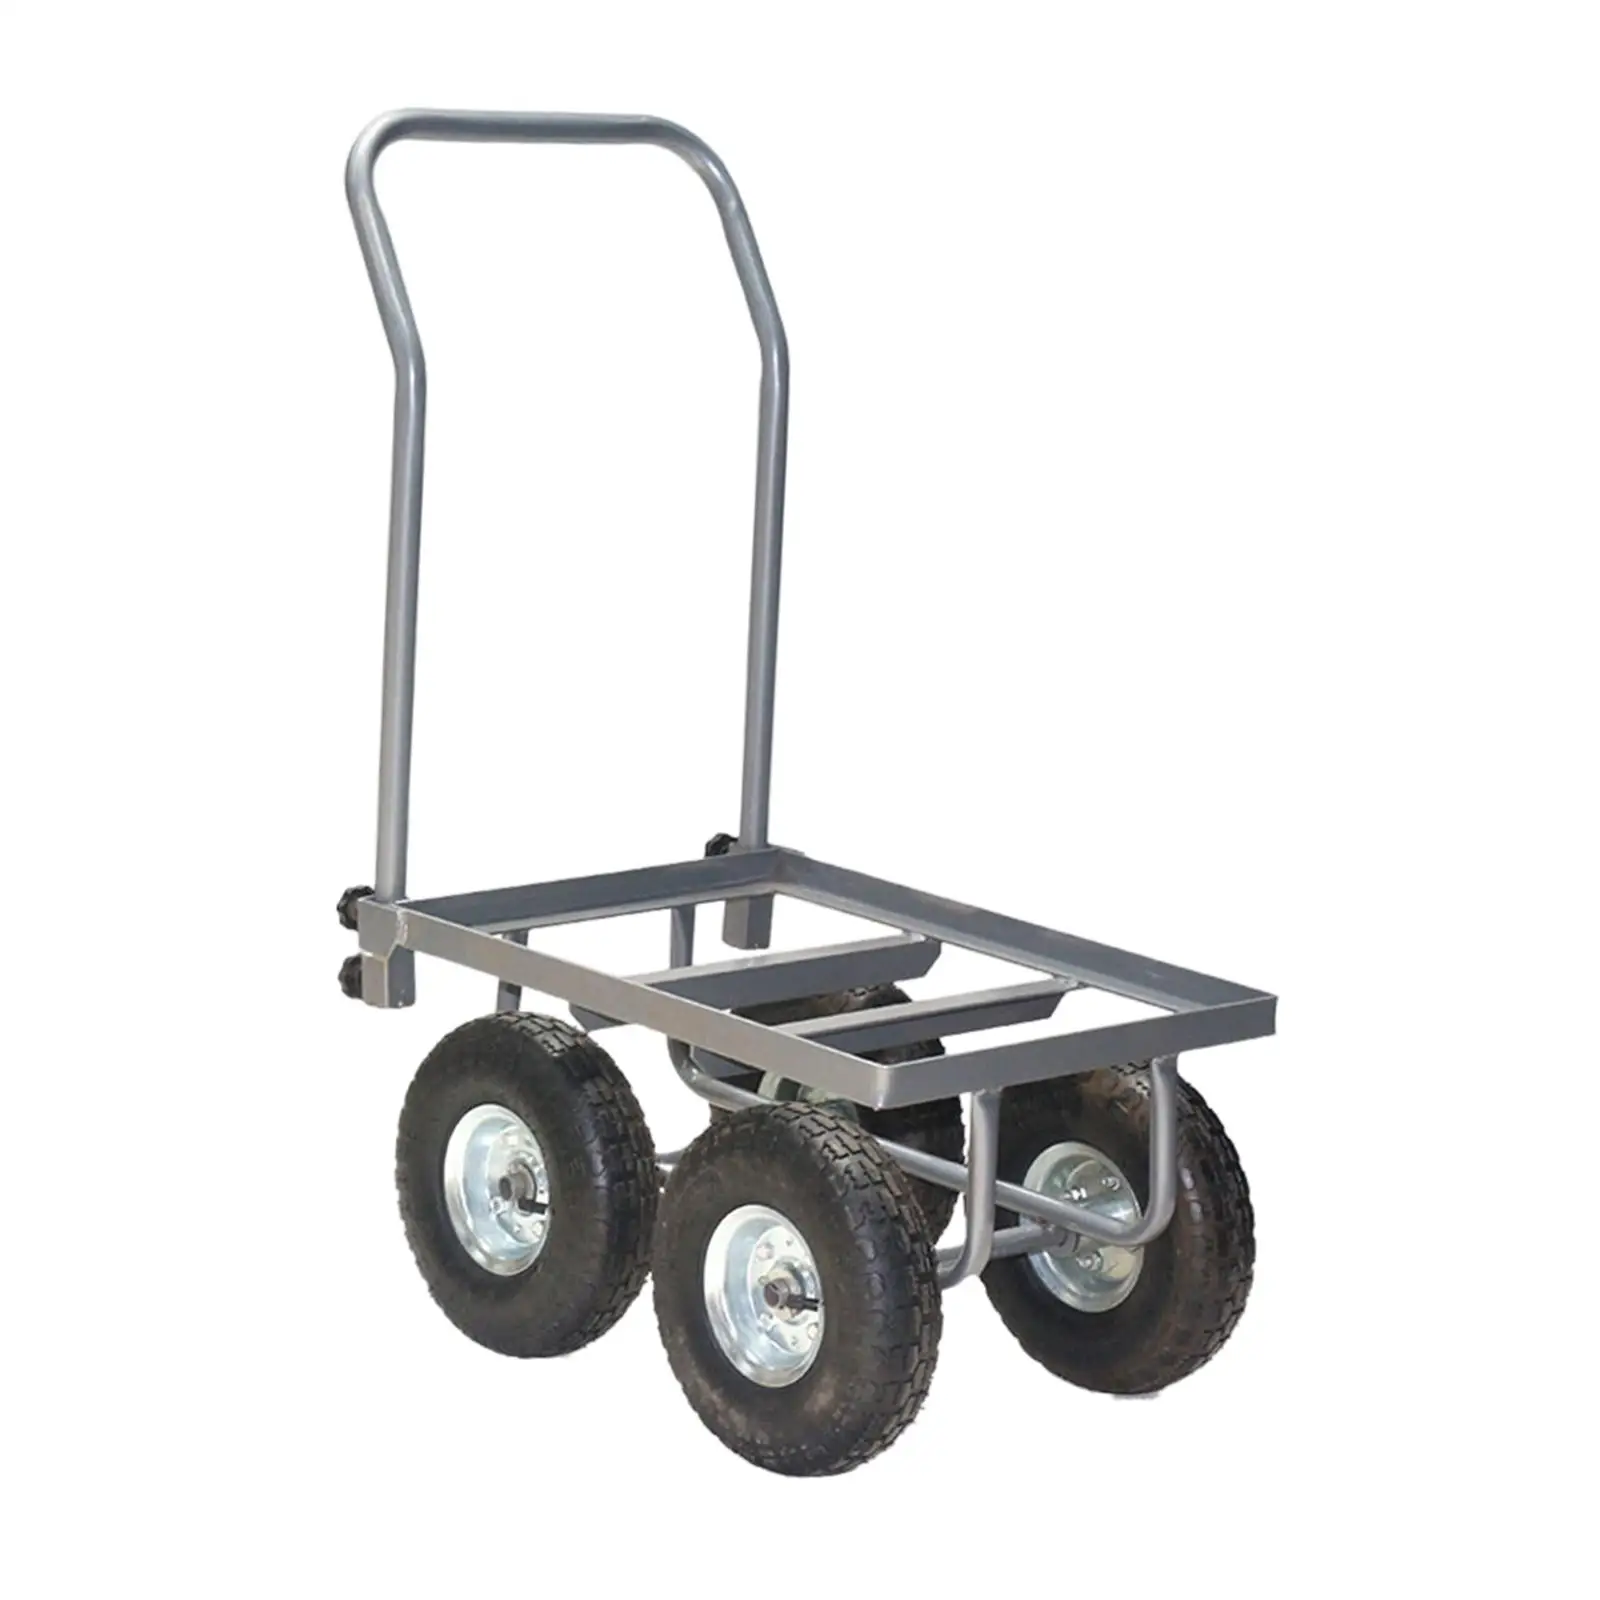 Heavy Duty Platform Trolley, 264lbs Capacity Foldable Hand Truck, Moving Flatbed Cart